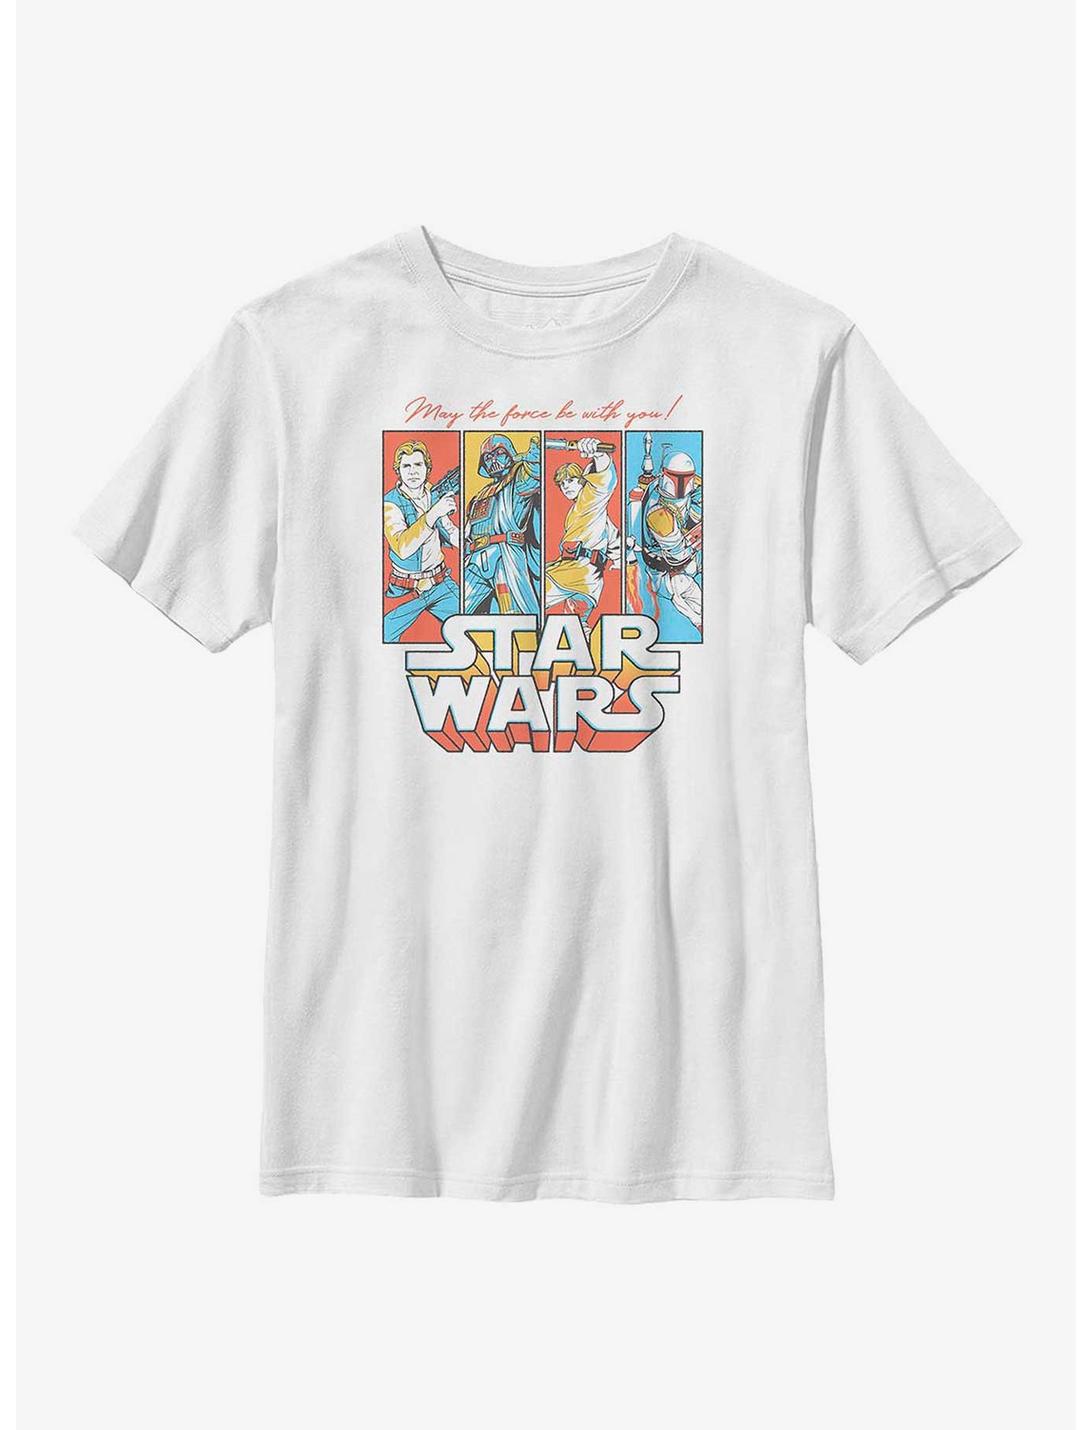 Star Wars Pop Culture Crew Youth T-Shirt, WHITE, hi-res